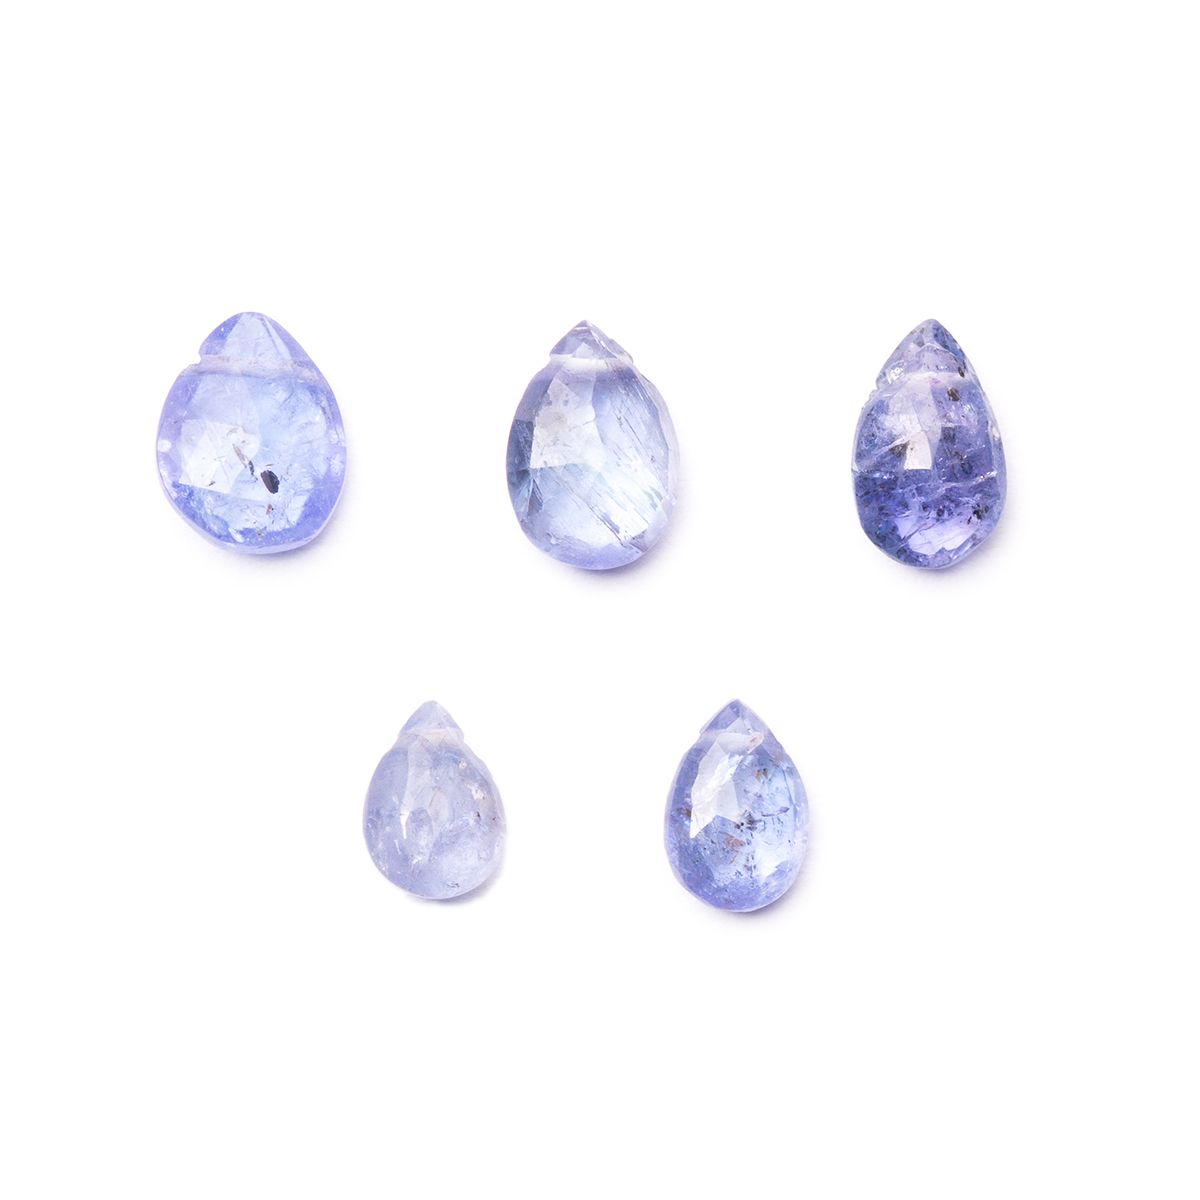 Tanzanite Faceted Teardrop Briolette Beads - Approx From 5mm 